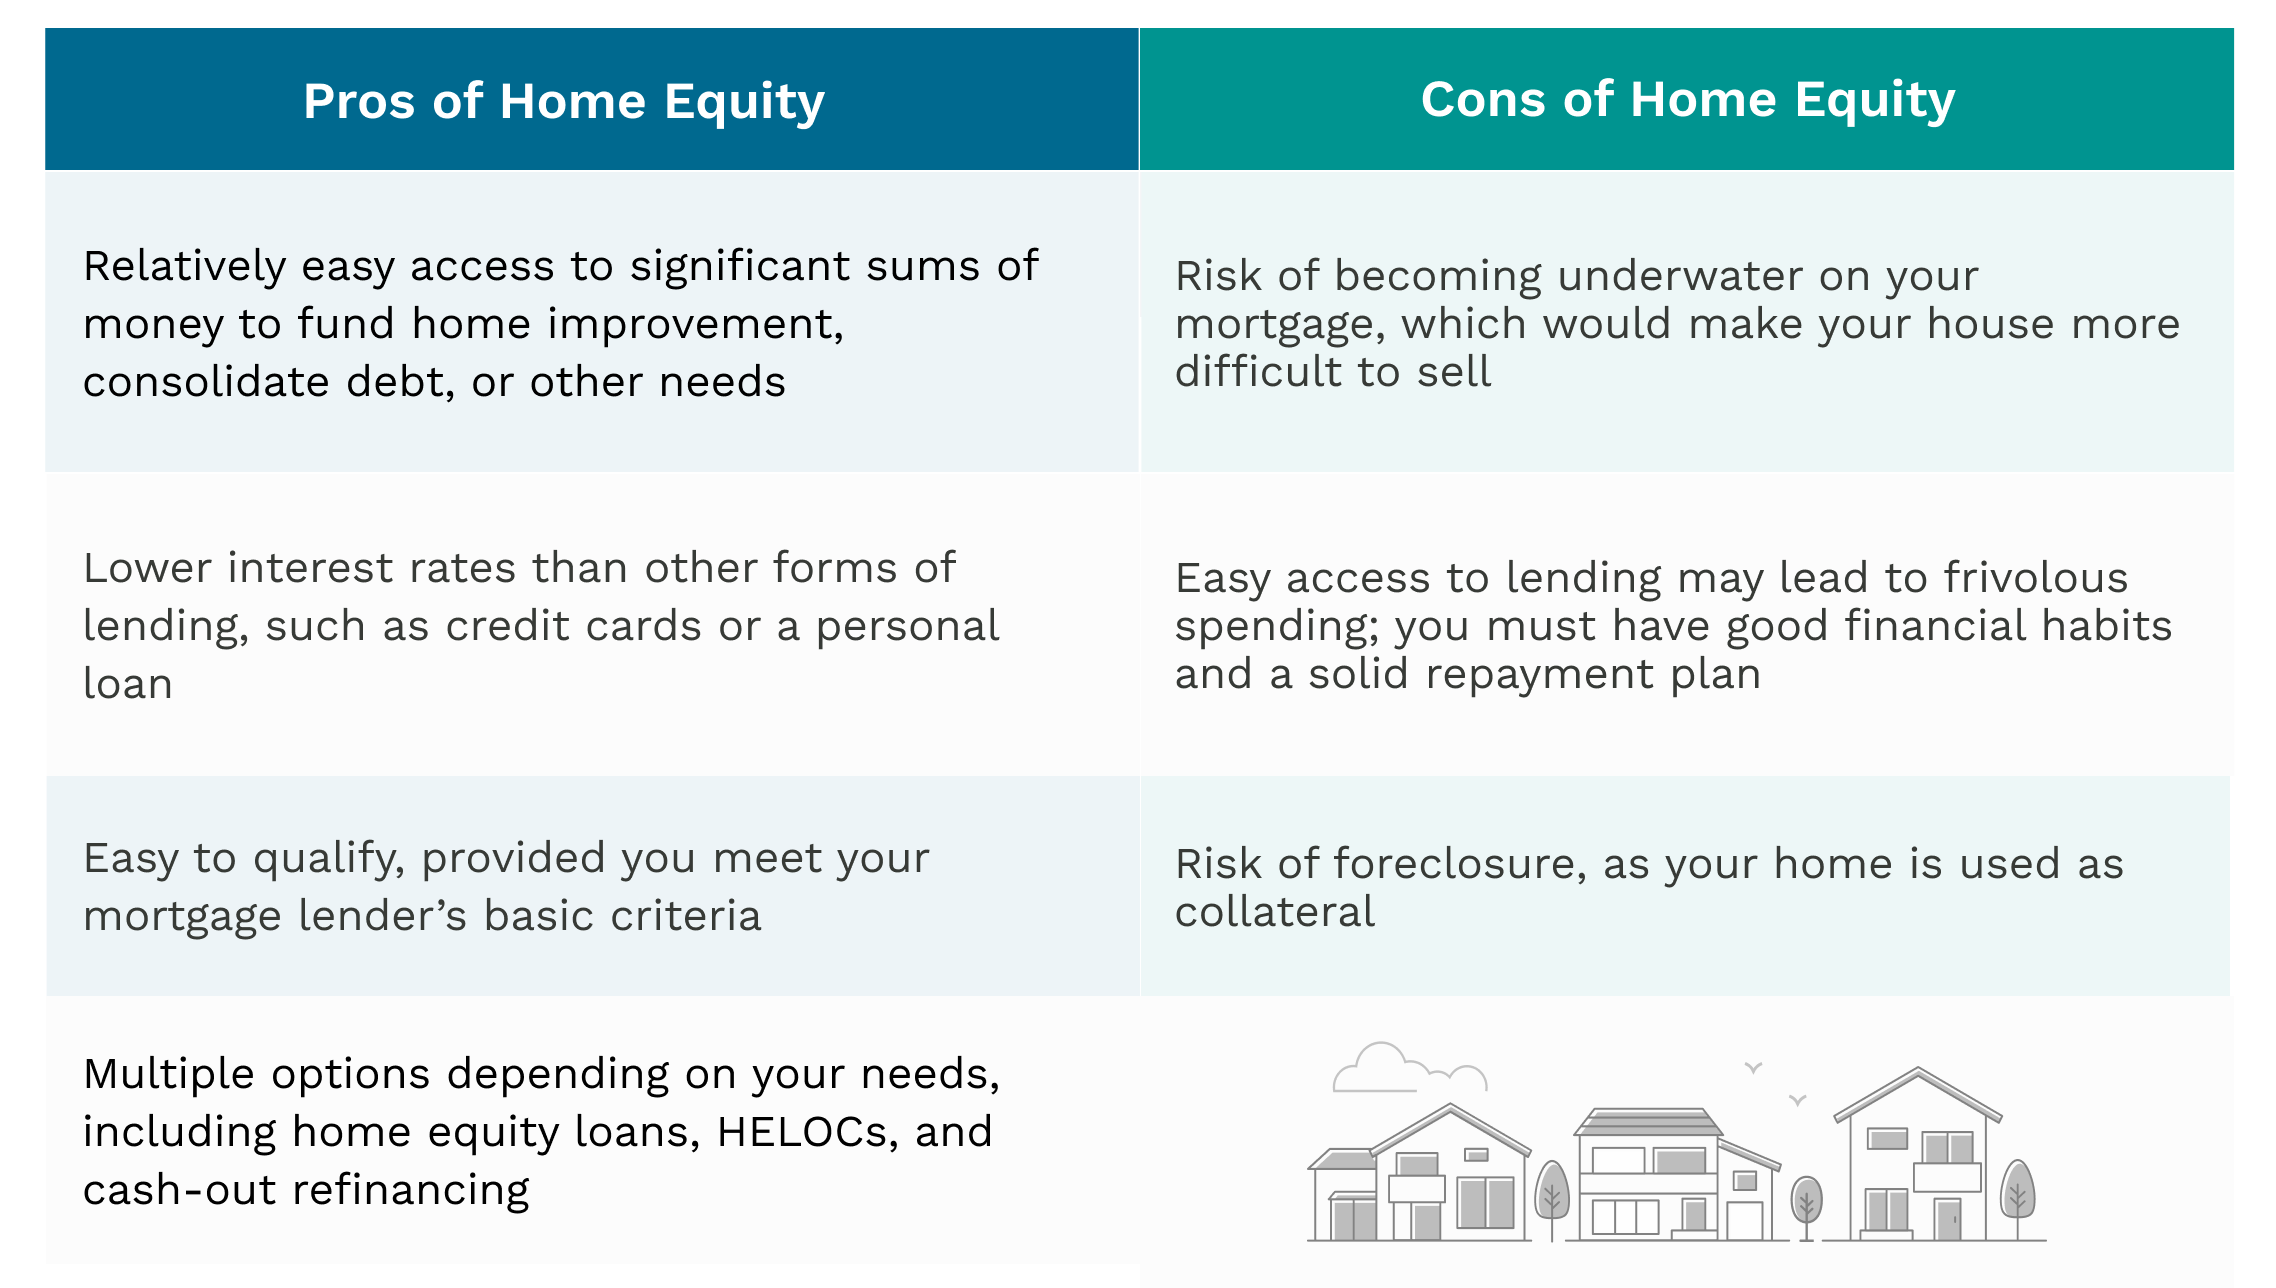 Pros of Home Equity Cons of Home Equity Relatively easy access to significant sums of money to fund home improvement, consolidate debt, or other needs Risk of becoming underwater on your mortgage, which would make your house more difficult to sell Lower interest rates than other forms of lending, such as credit cards or a personal loan Easy access to lending may lead to frivolous spending; you must have good financial habits and a solid repayment plan Easy to qualify, provided you meet your mortgage lender’s basic criteria Risk of foreclosure, as your home is used as collateral Multiple options depending on your needs, including home equity loans, HELOCs, and cash-out refinancing 